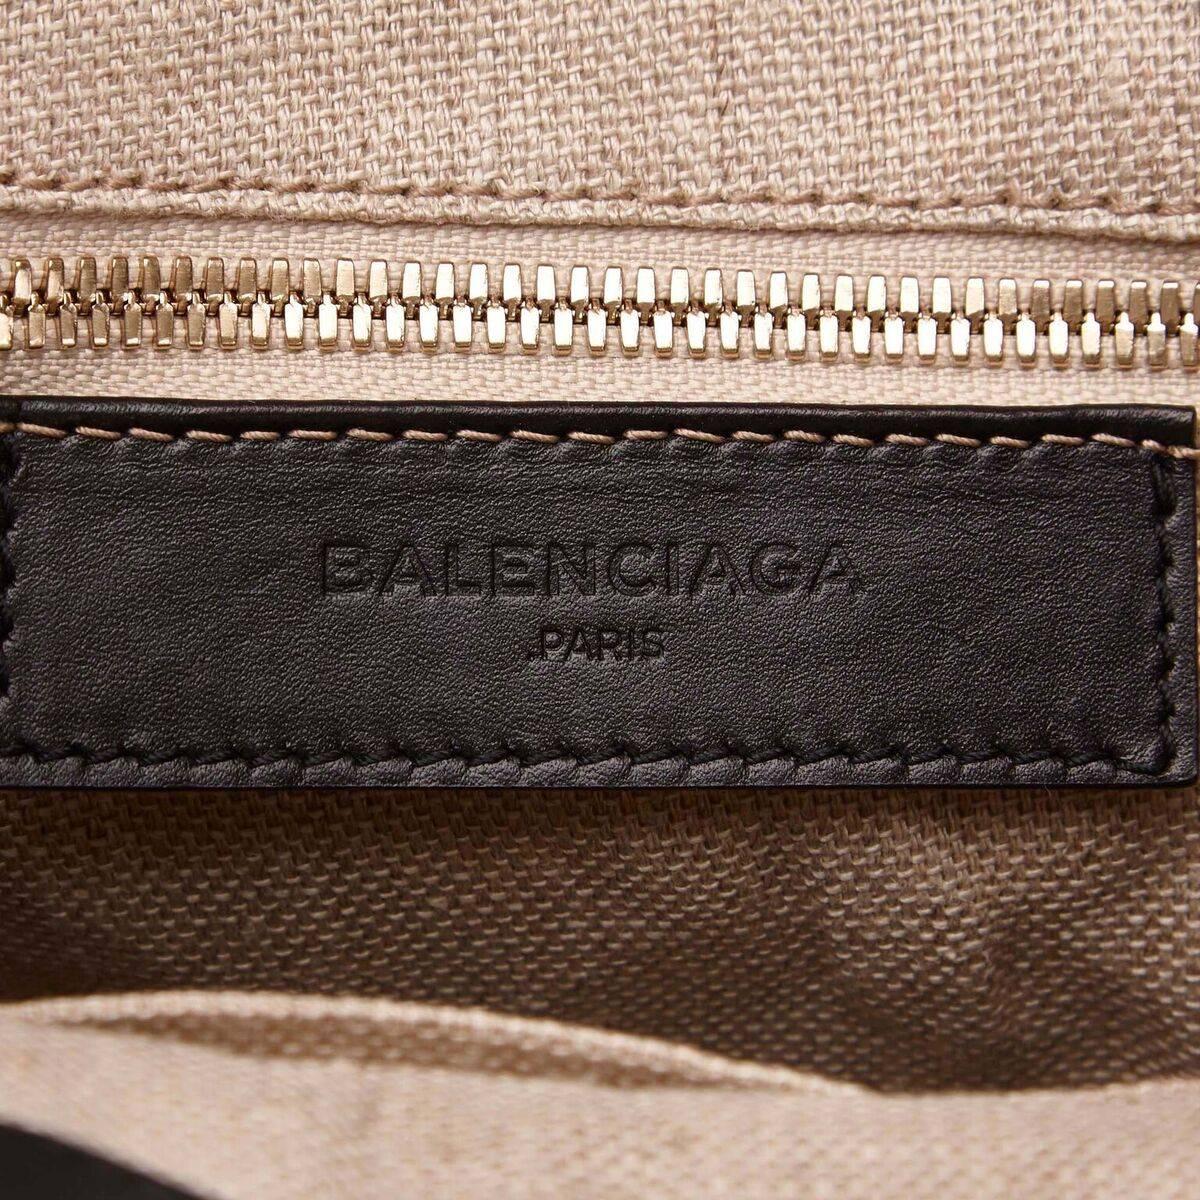 Product details:  Black leather and tan canvas satchel by Balenciaga.  Trimmed with brown python skin.  Top carry handles.  Detachable, adjustable crossbody strap.  Open top.  Lined interior with inner zip and open pockets.  Front exterior flap